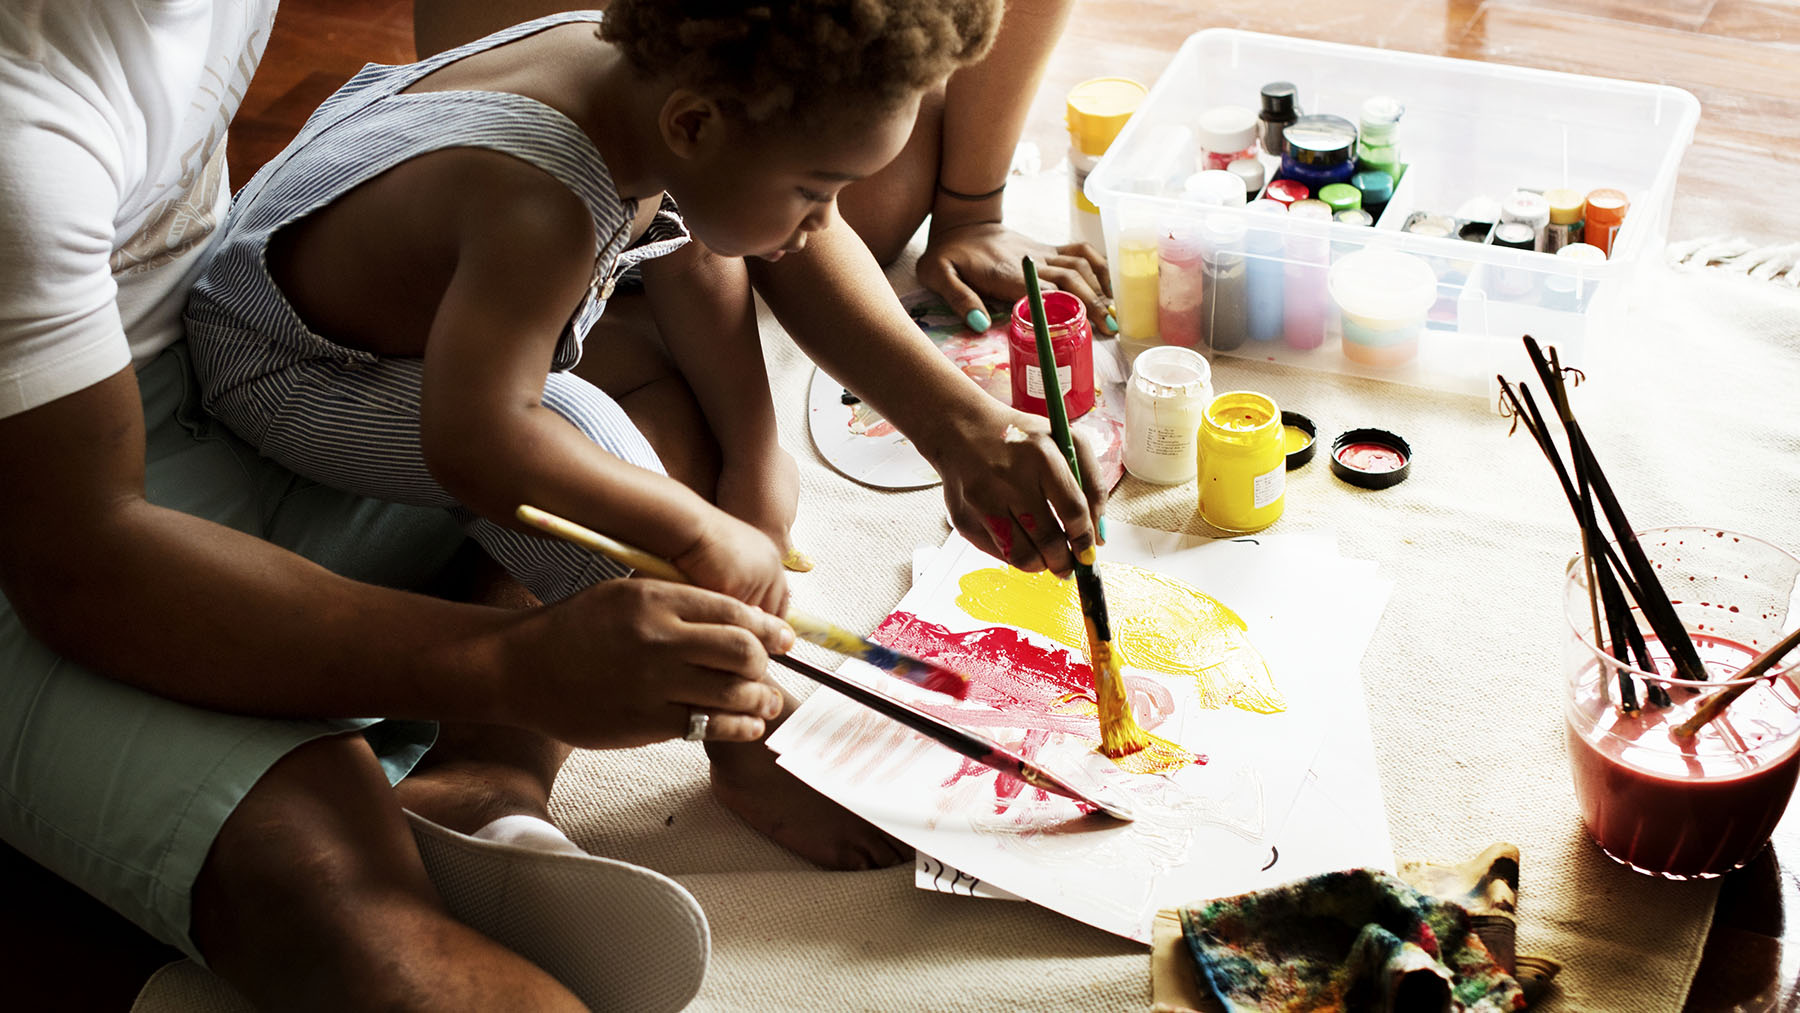 Stock photo of a black child painting with adults in background (Image from RawPixel.com)